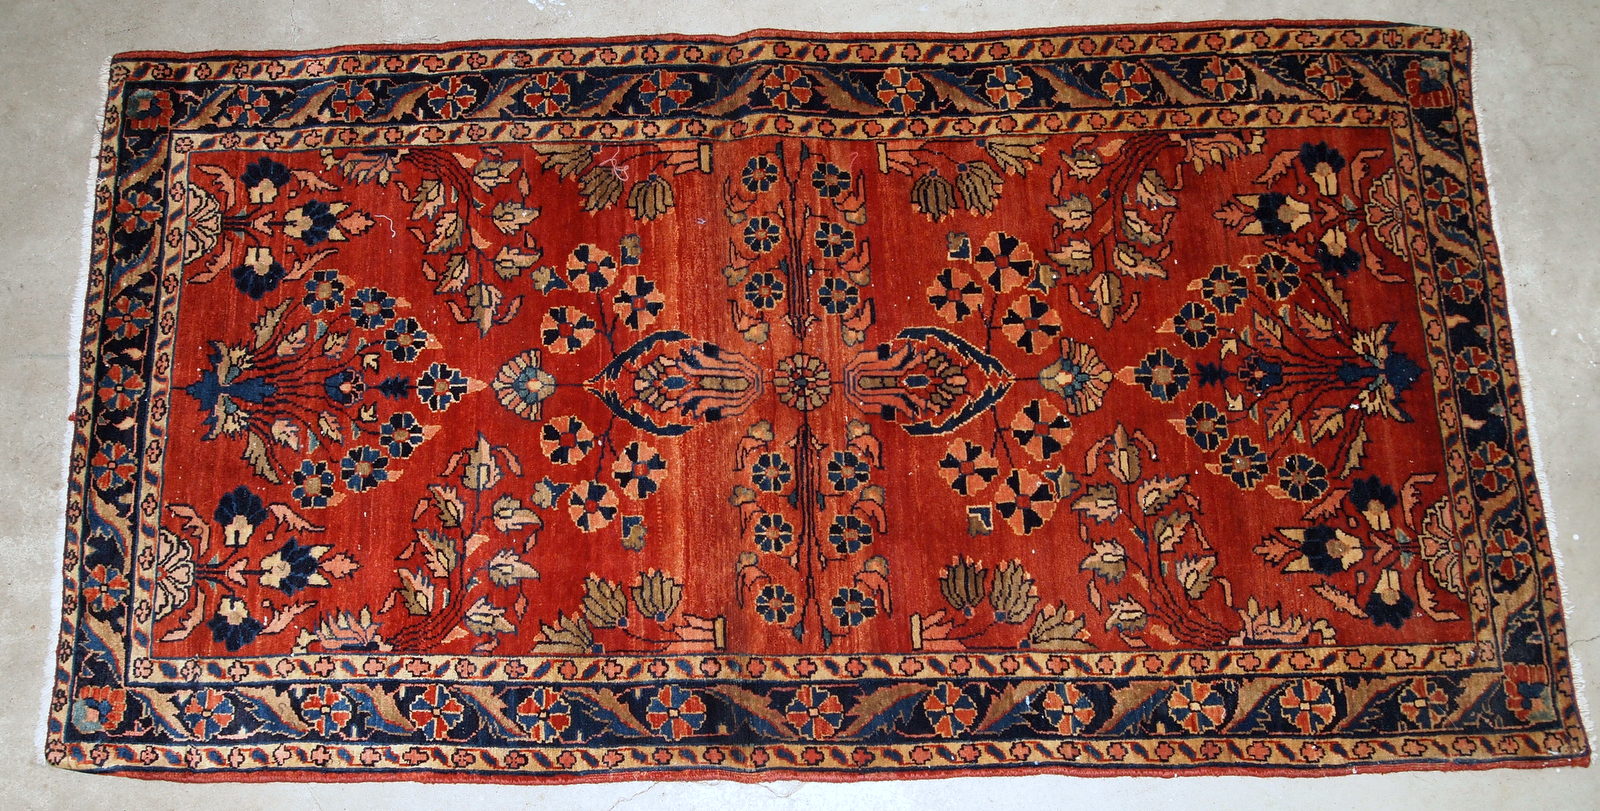 Handmade antique Persian Sarouk Mahajeran rug in original good condition. The rug is from the beginning of 20th century made in bright red wool.